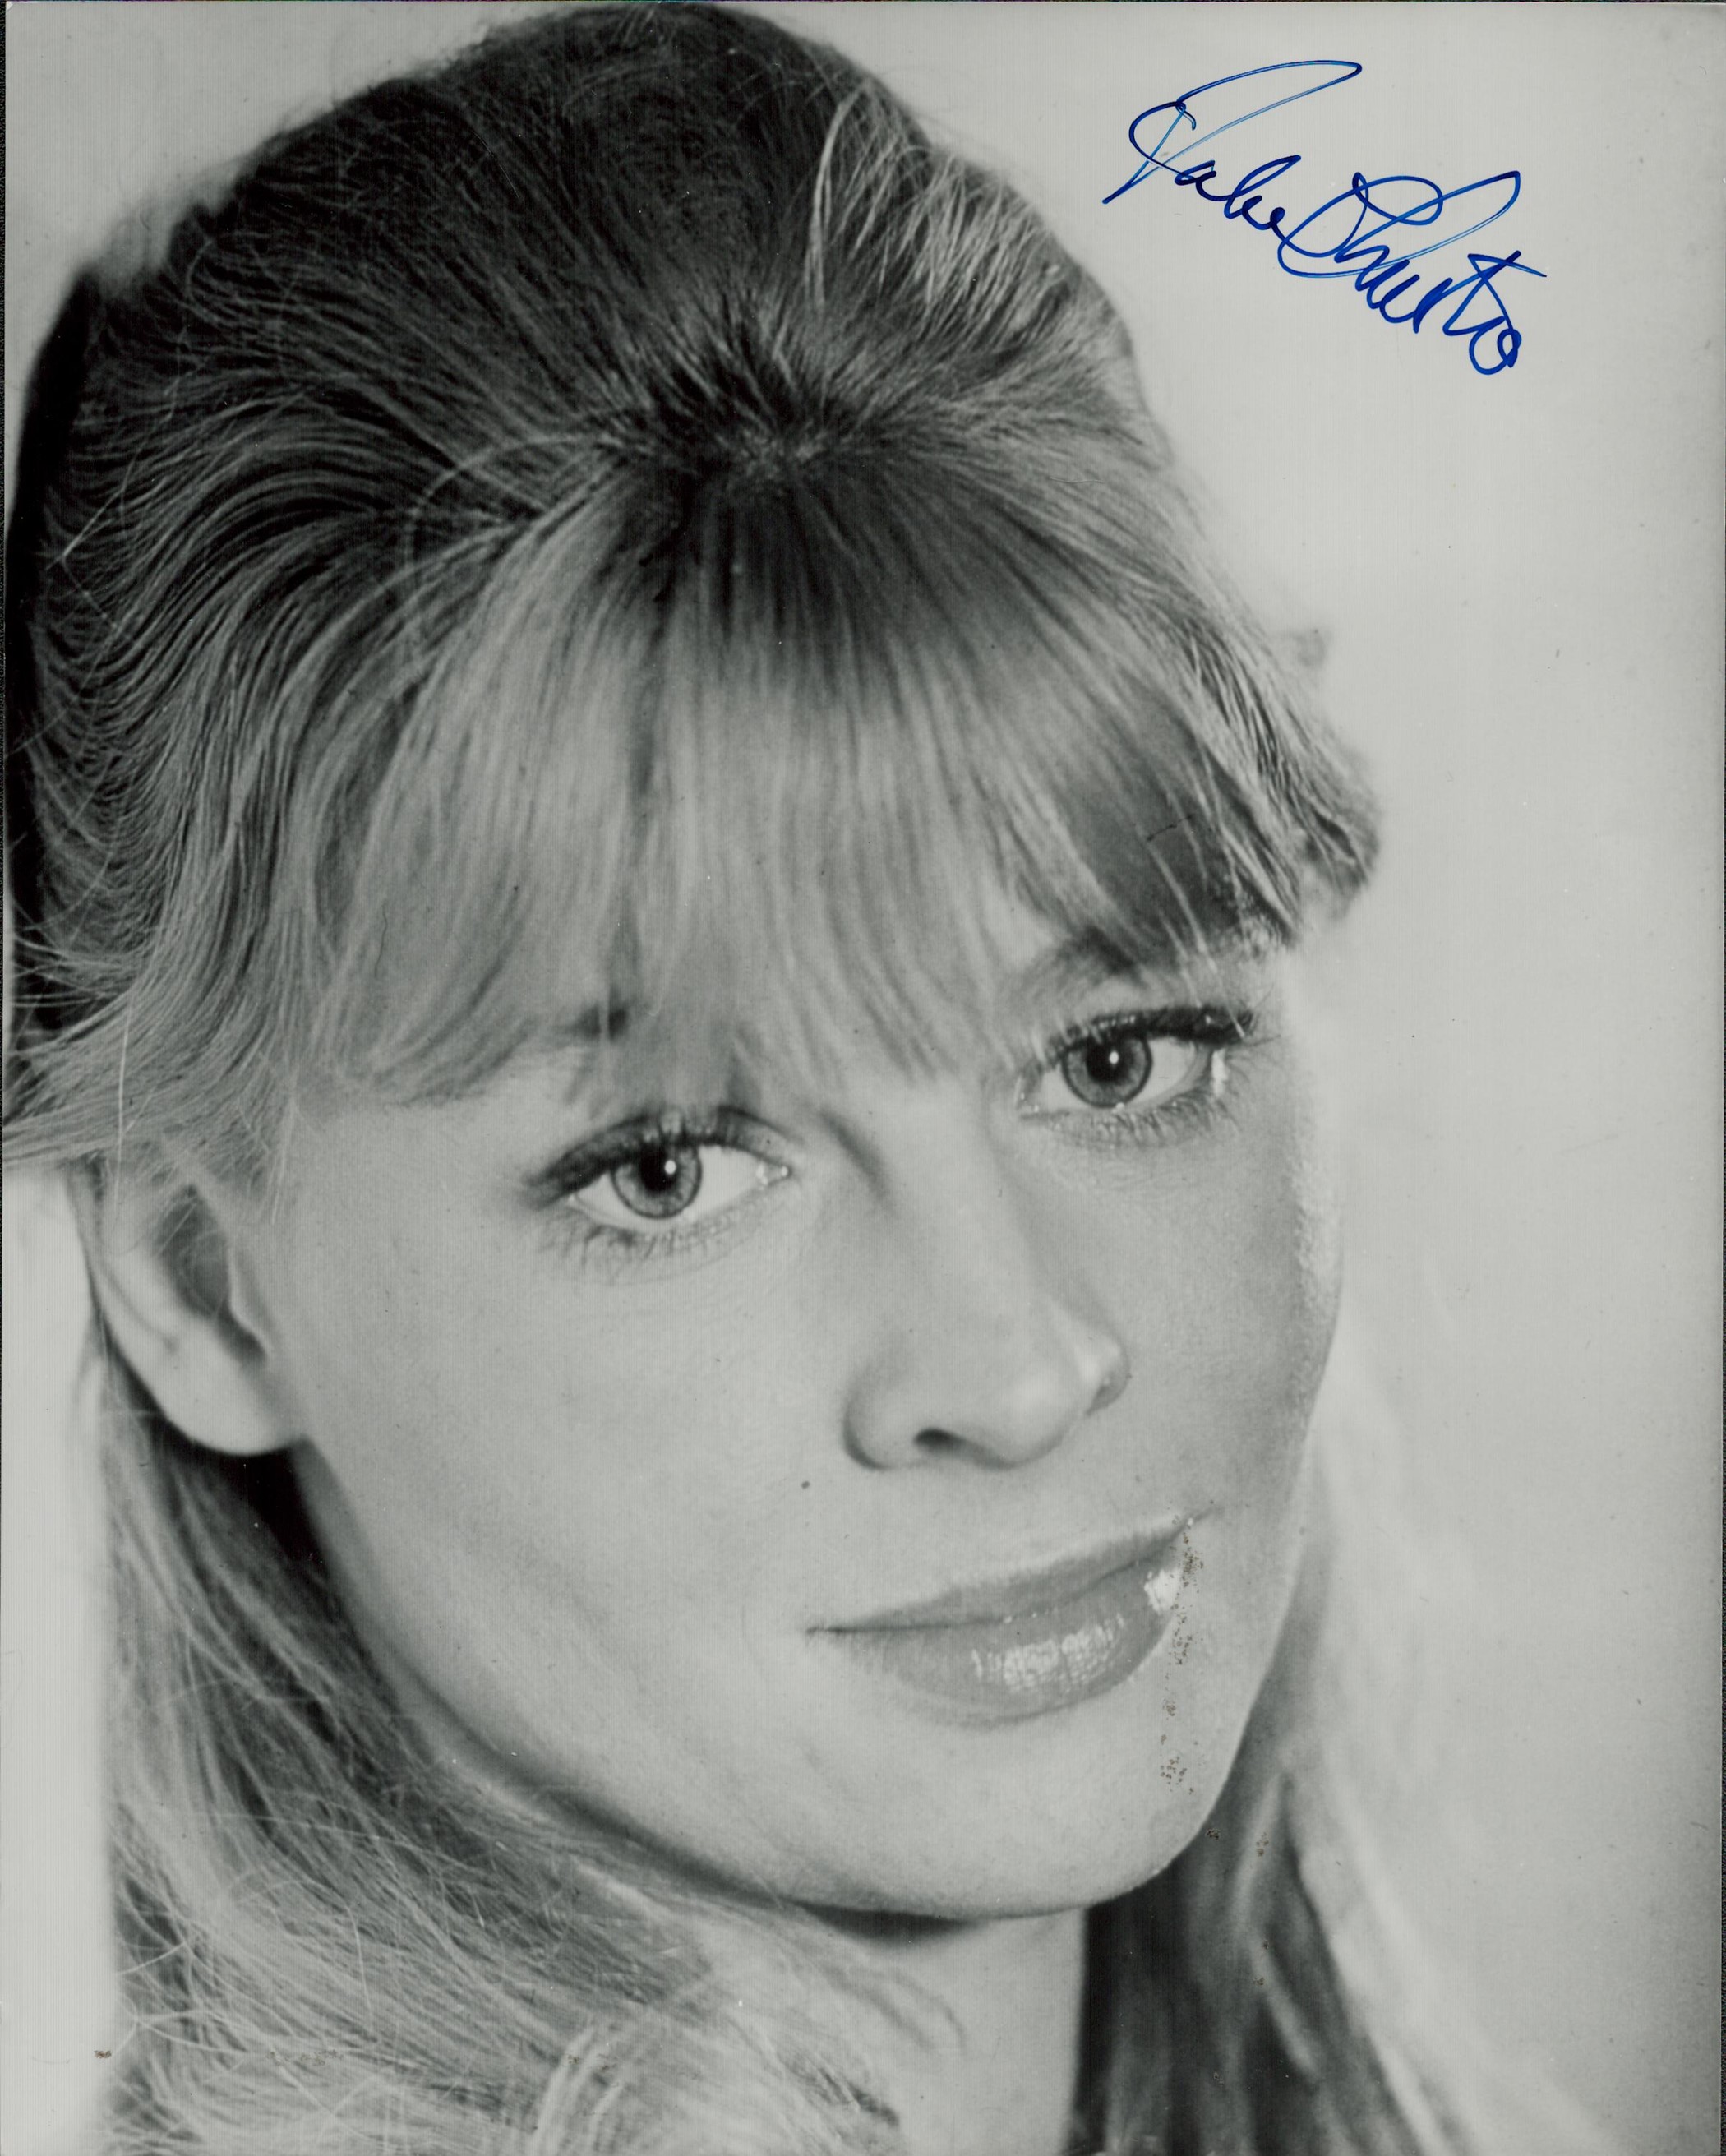 Julie Christie signed 10x8 black and white photograph, nice early imageAll autographs come with a